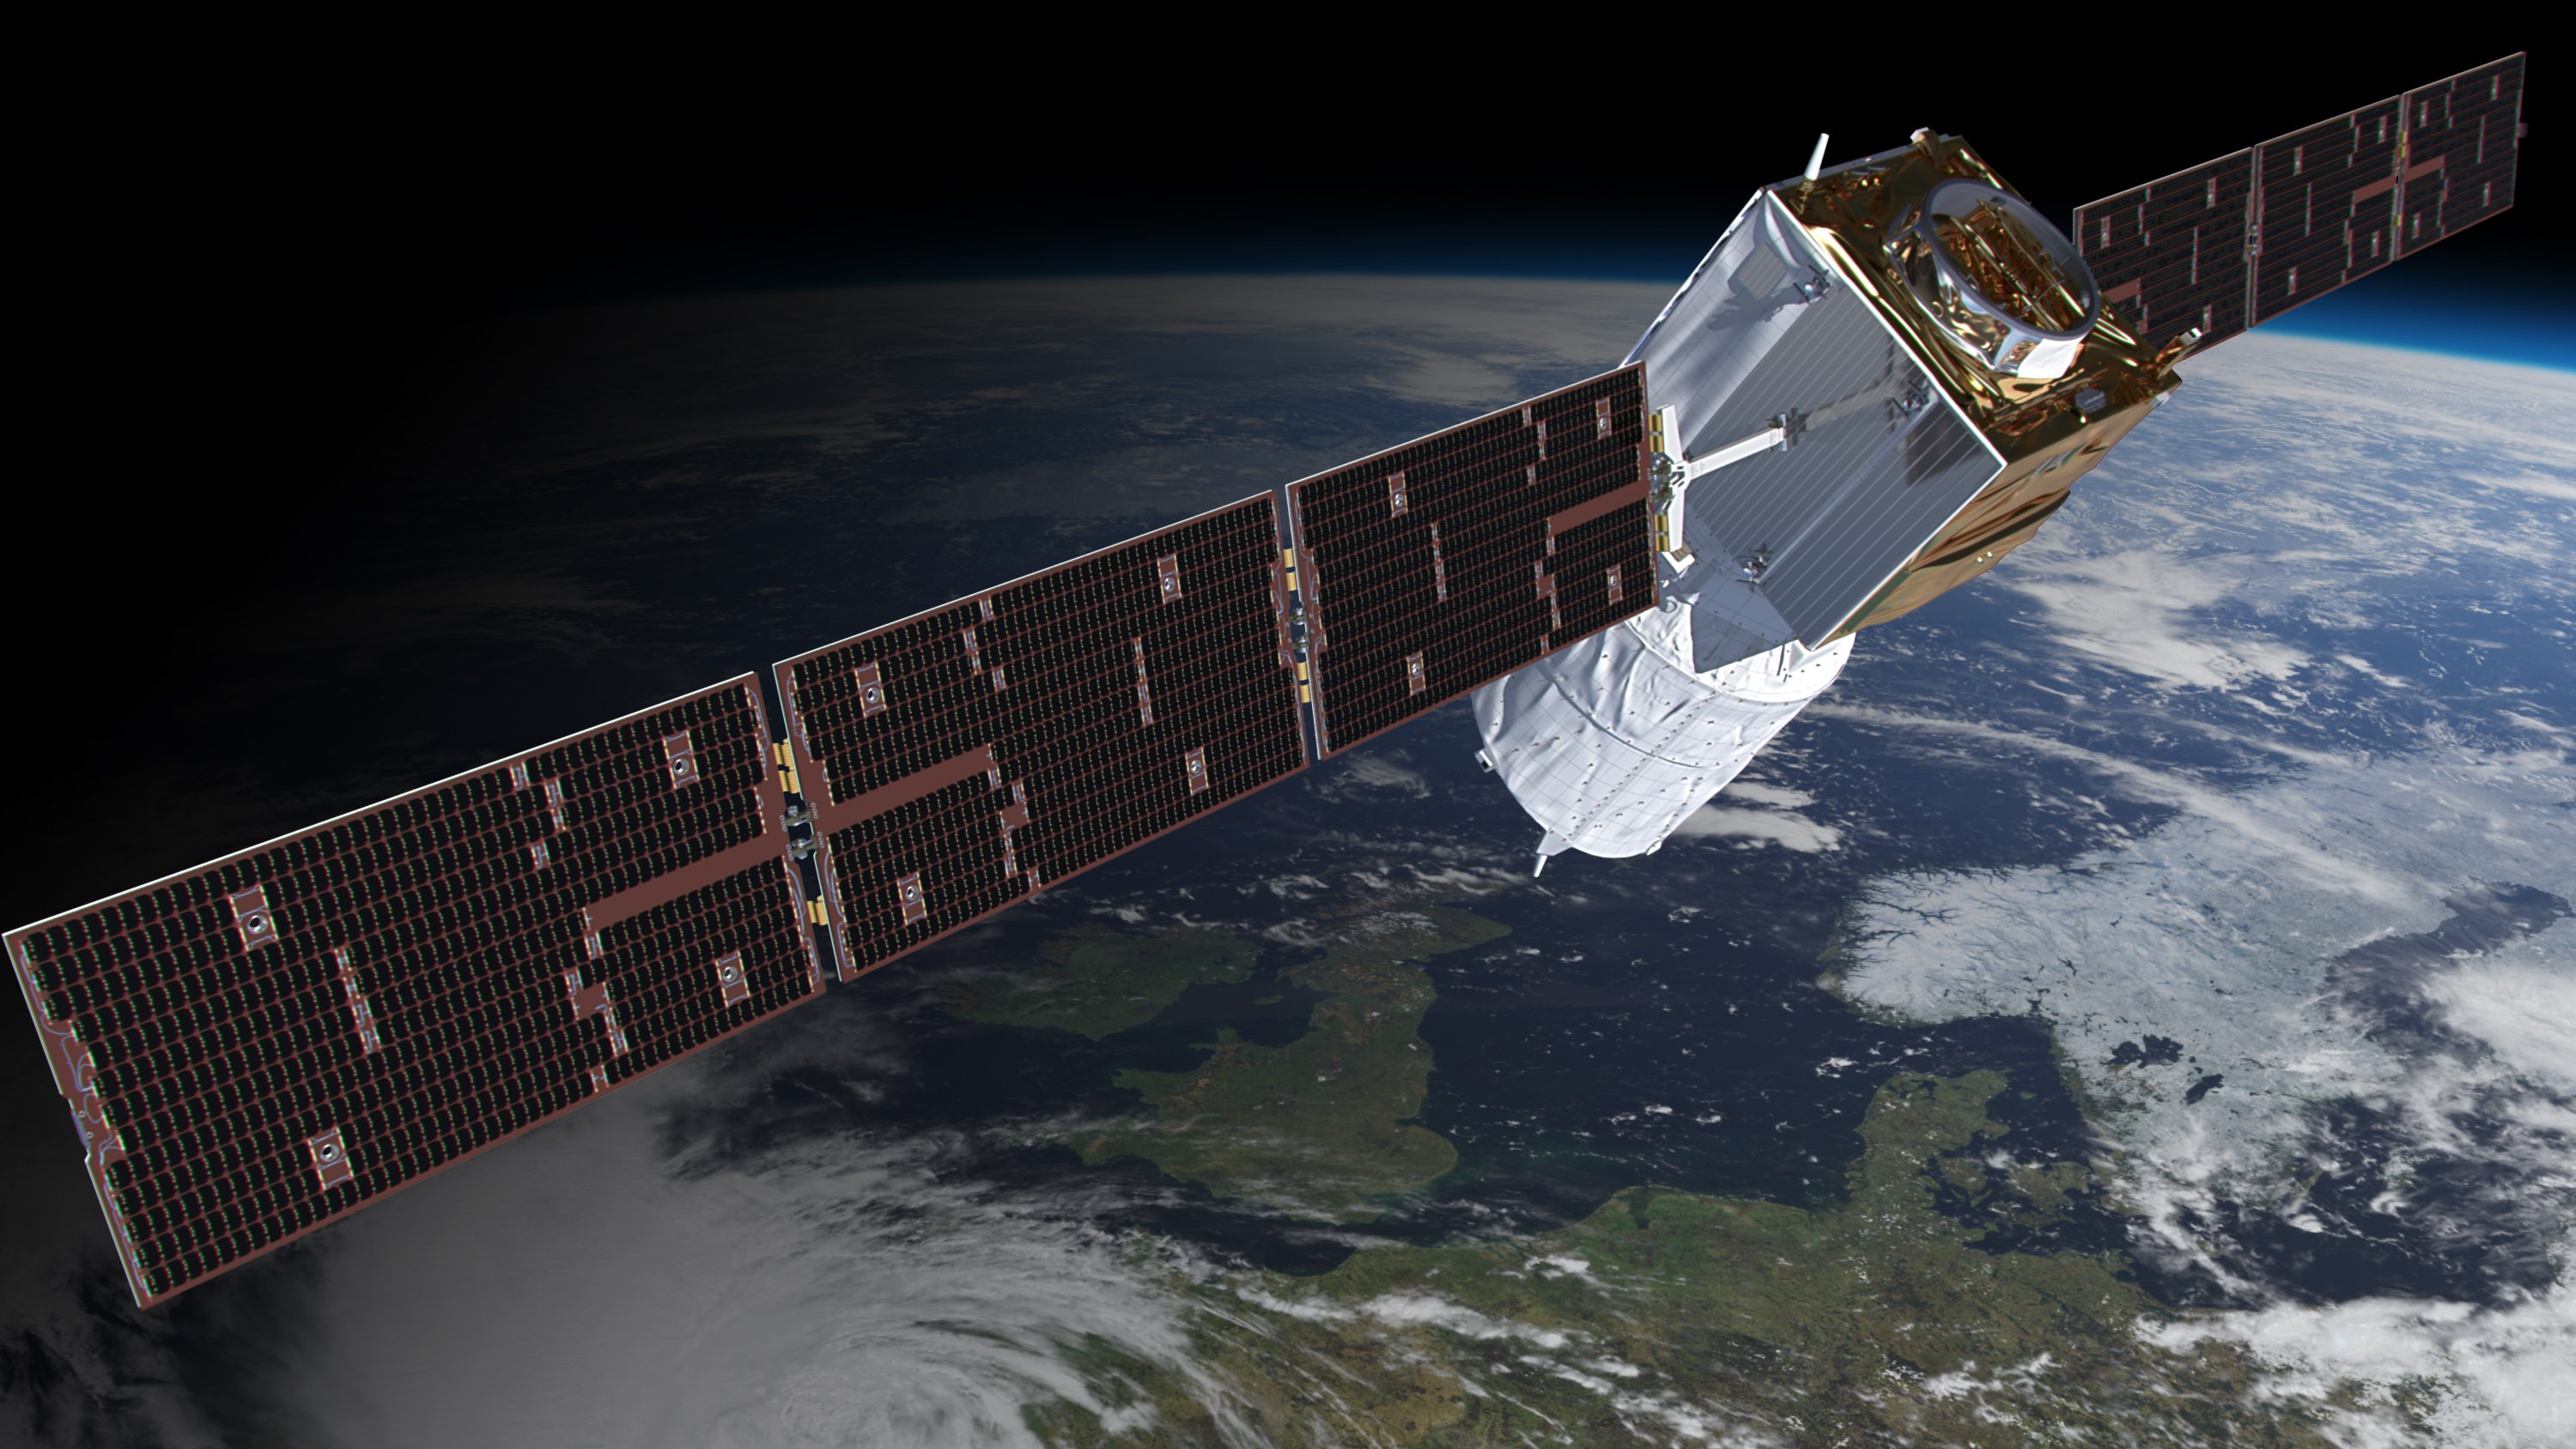 The European Space Agency's Aeolus satellite will observe wind speeds from space.